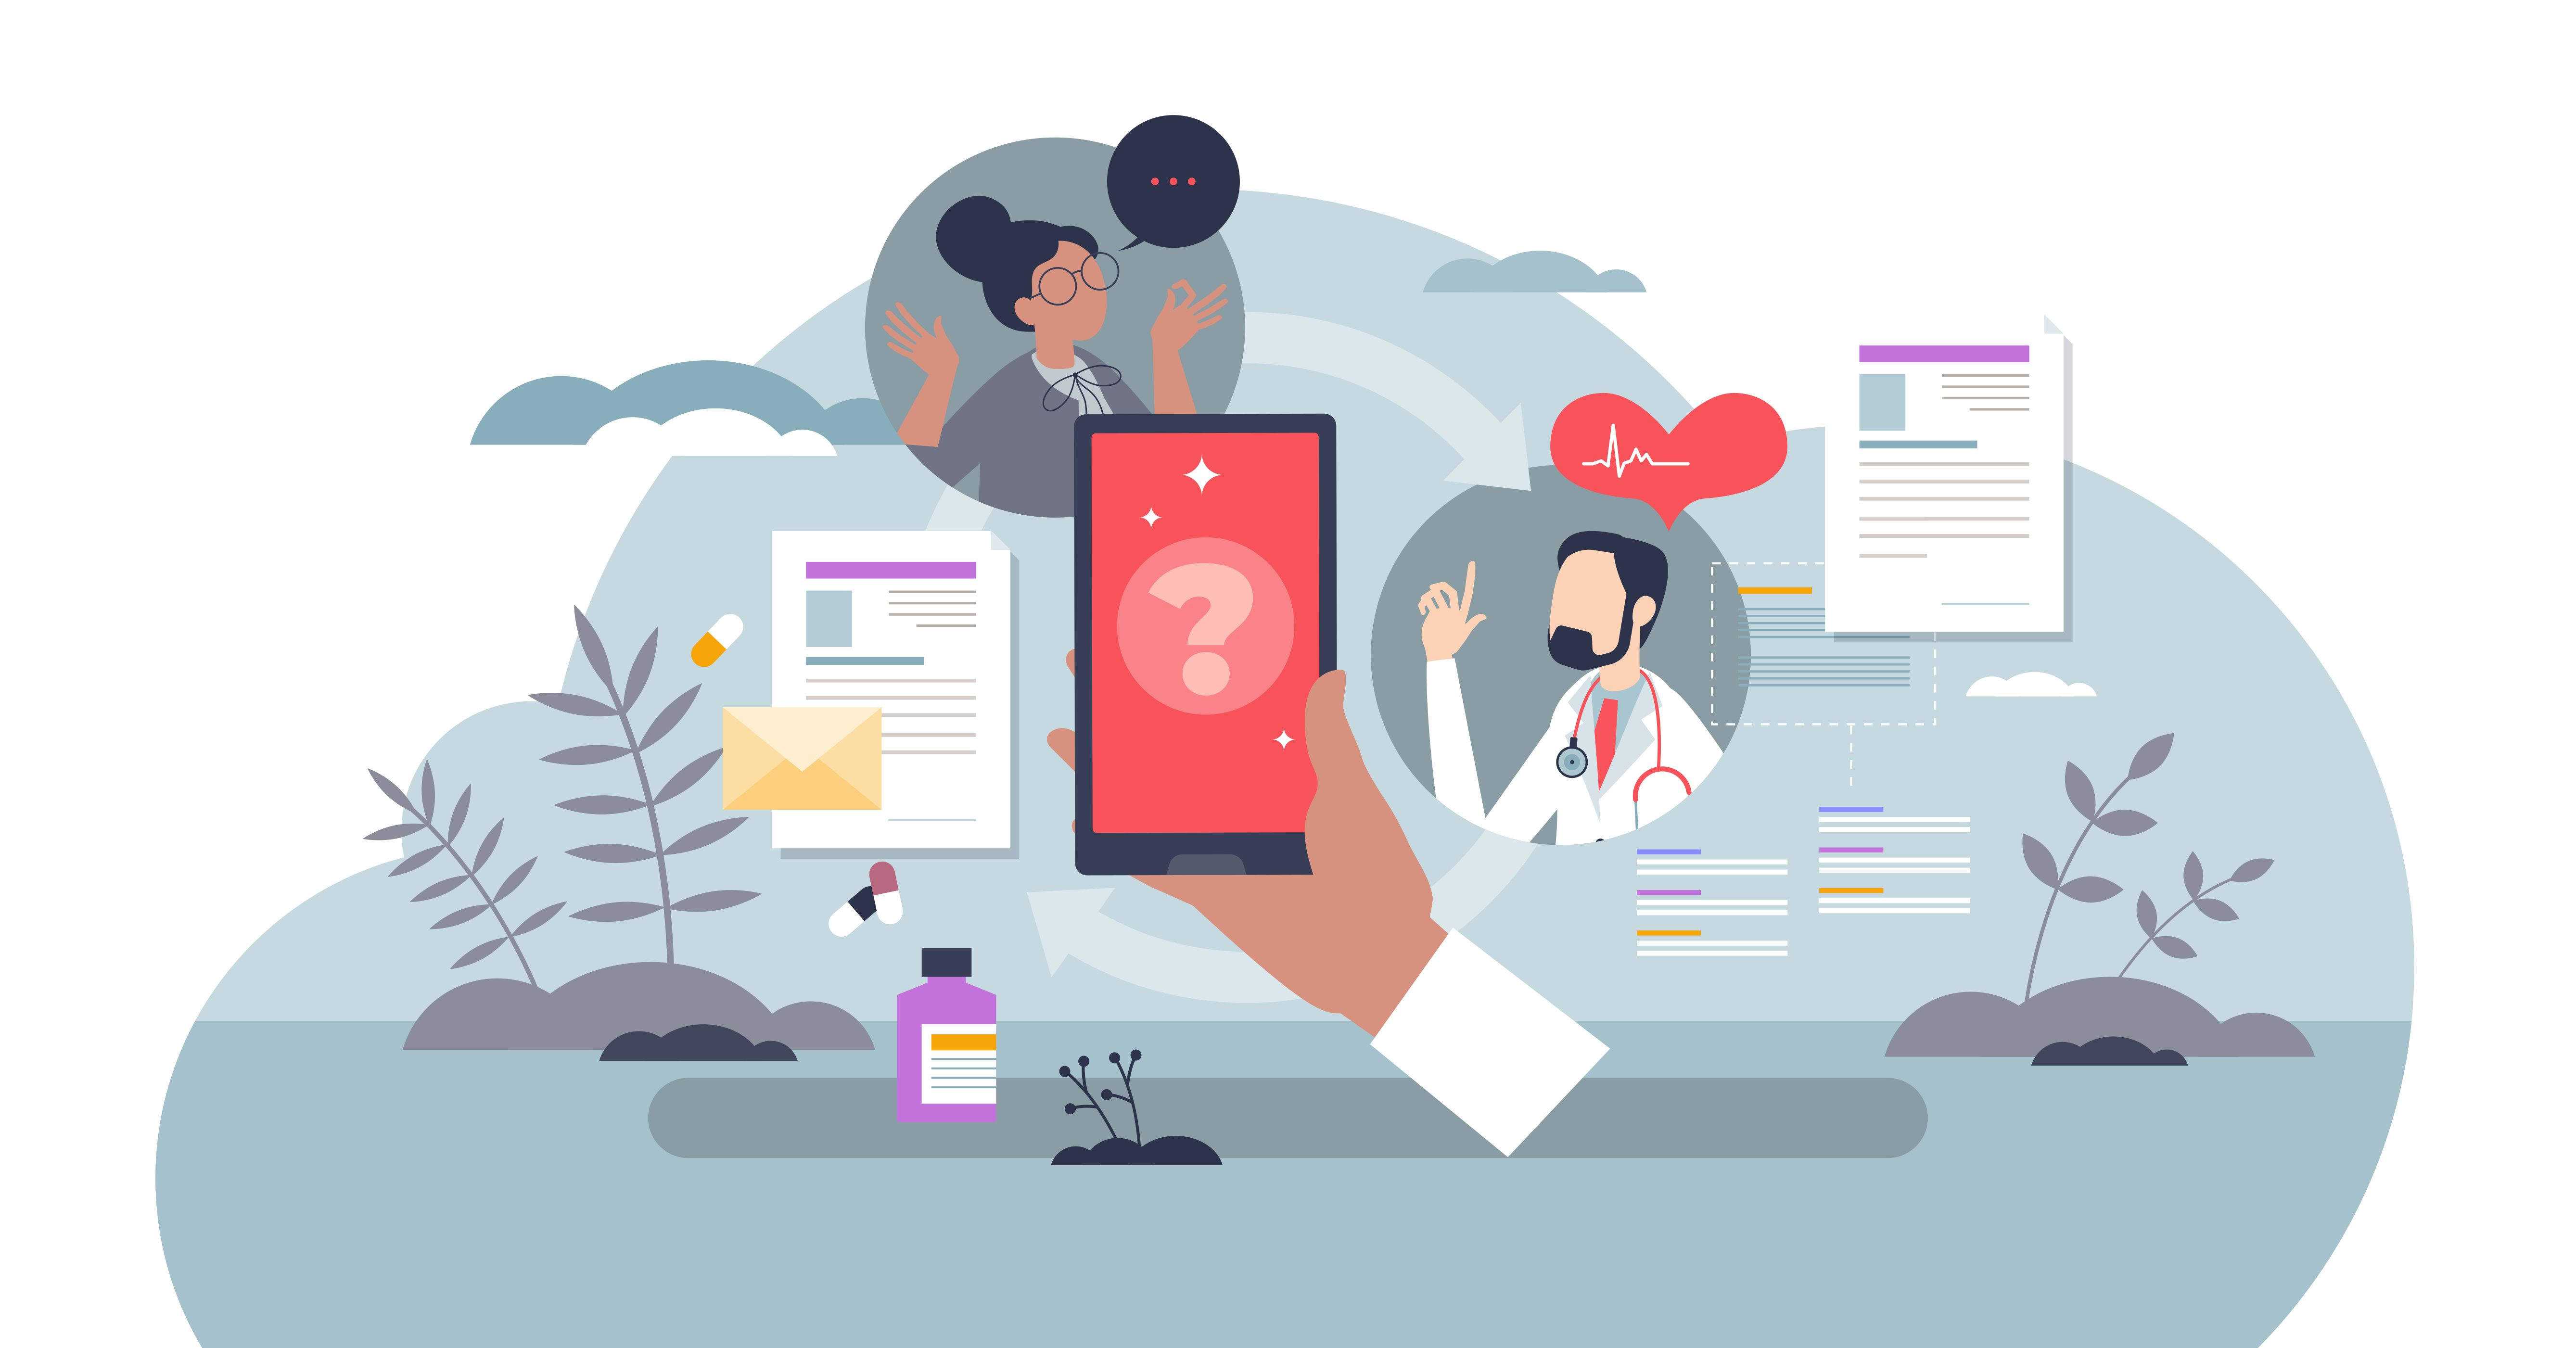 How remote therapeutic monitoring helps physicians improve patient care and education